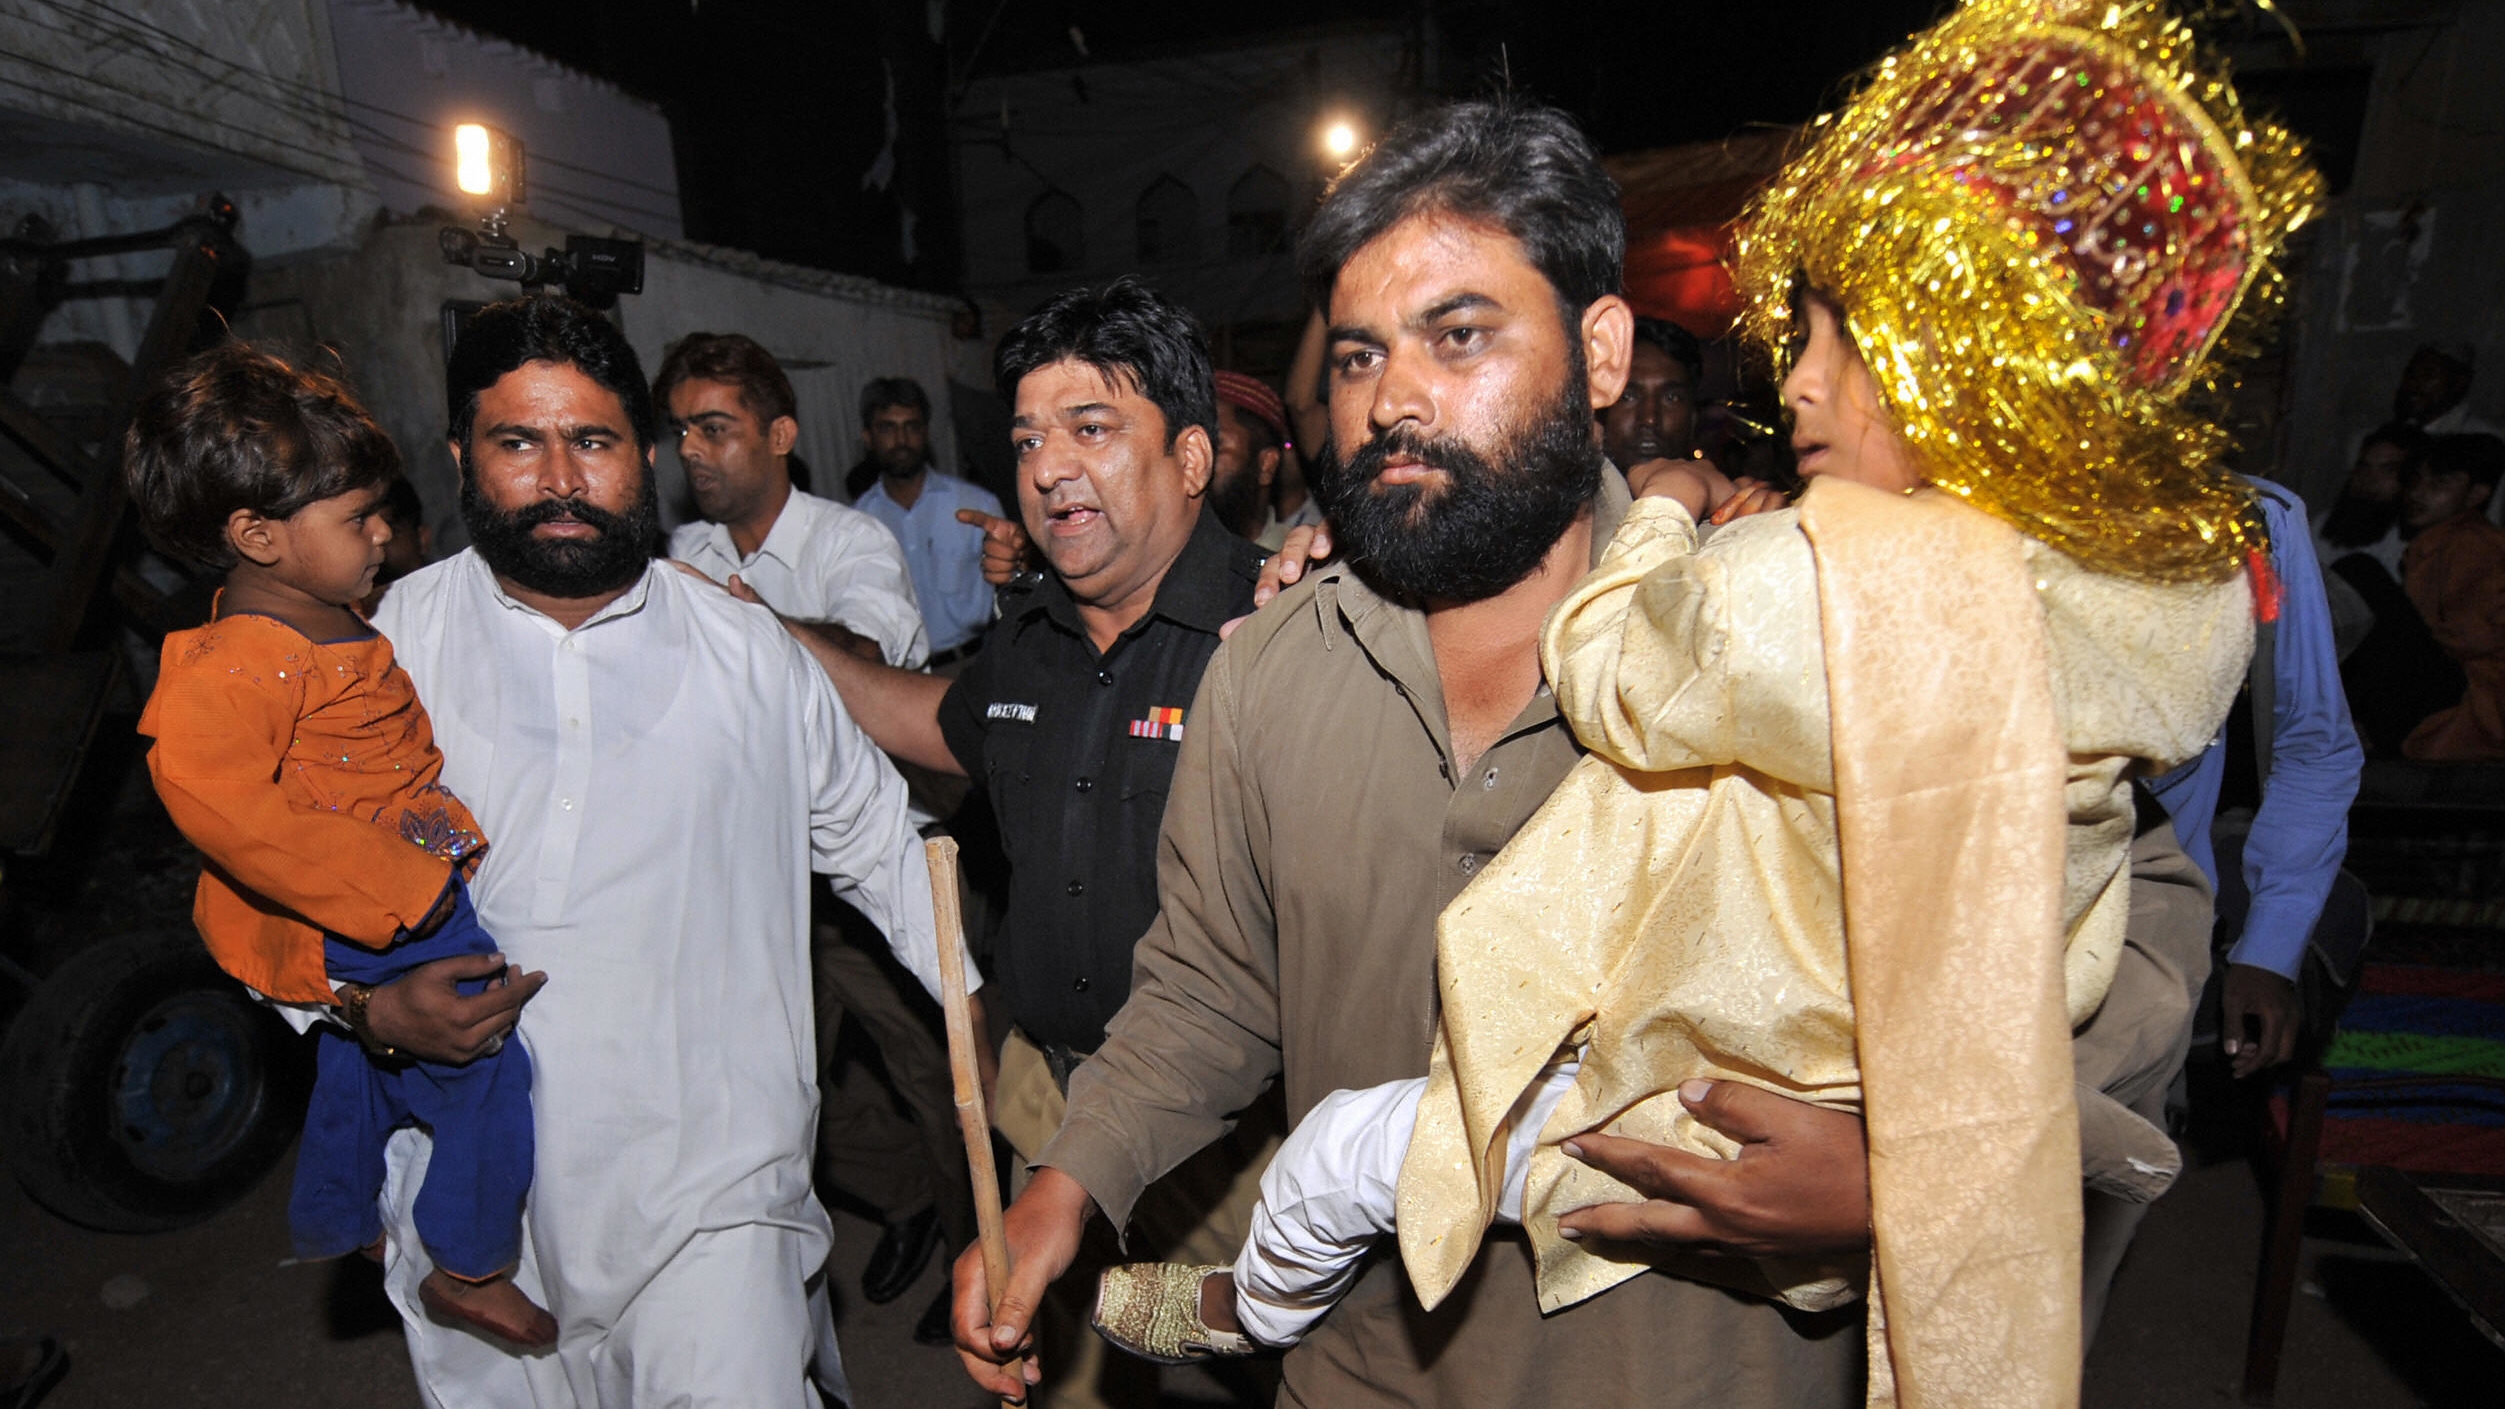 Pakistani National Ahmed Quddus Covers Himself With A Blanket As Police Escort Him